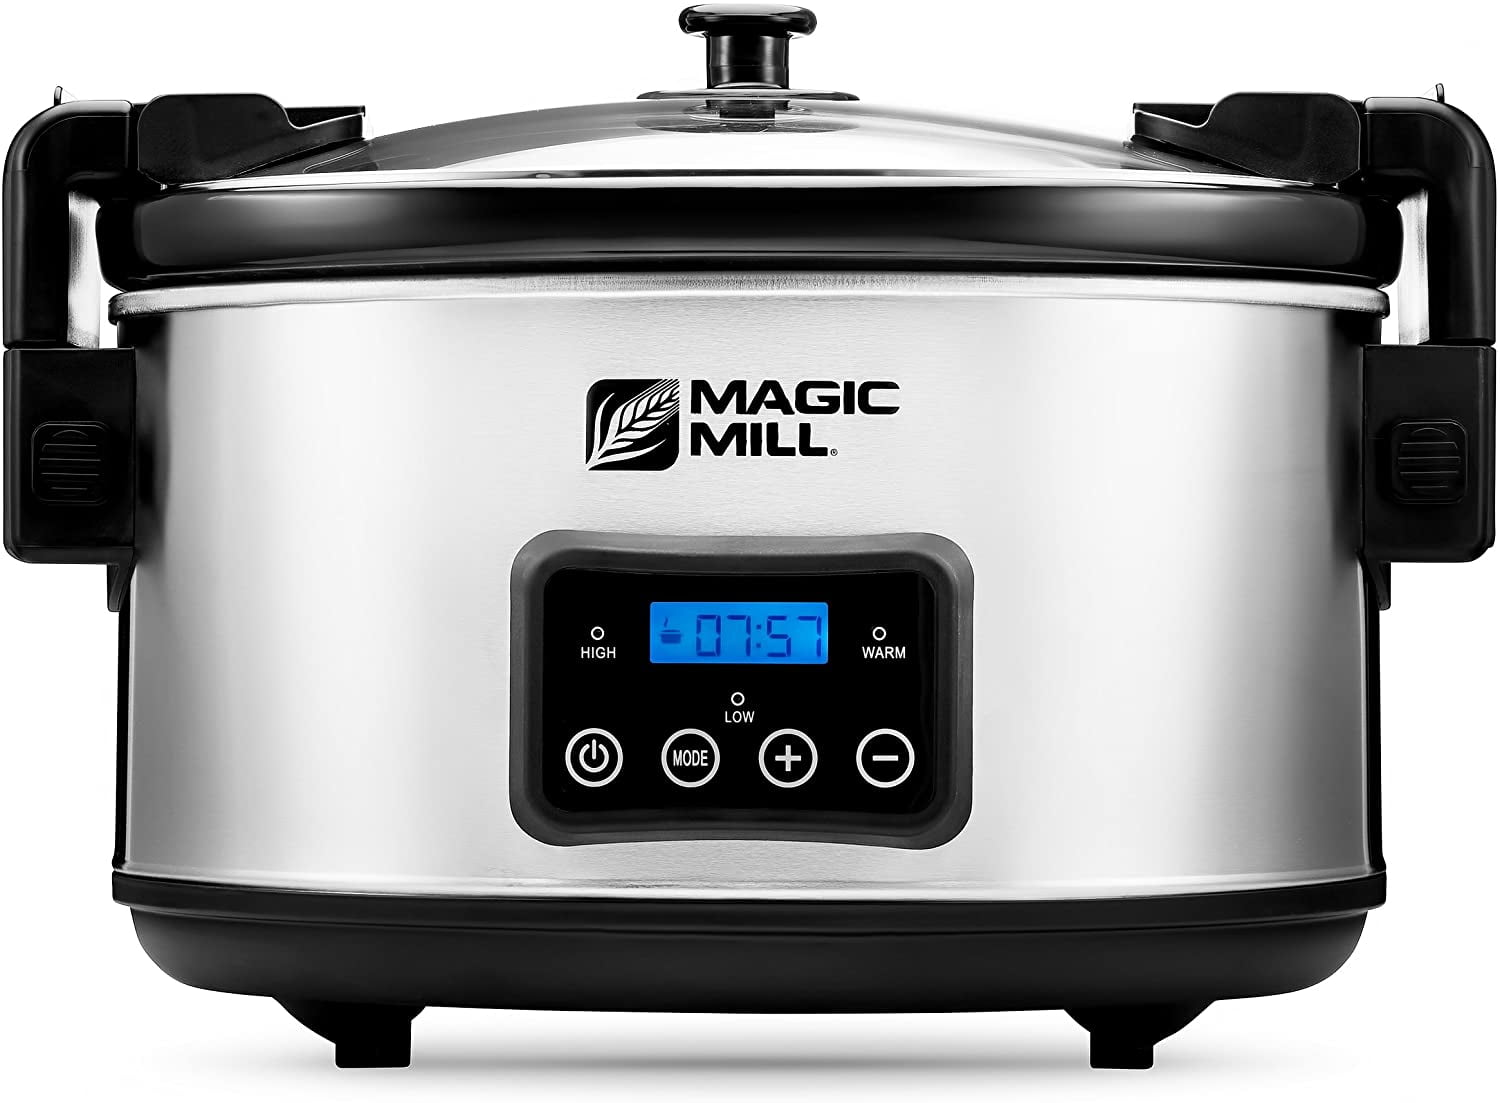 MAGIC MILL 8 QUART OVAL CROCK POT WITH COOL TOUCH HANDLES AND ALUMINUM POT  WITH HEAVY DUTY NON-STICK COATING MODEL# MSC820